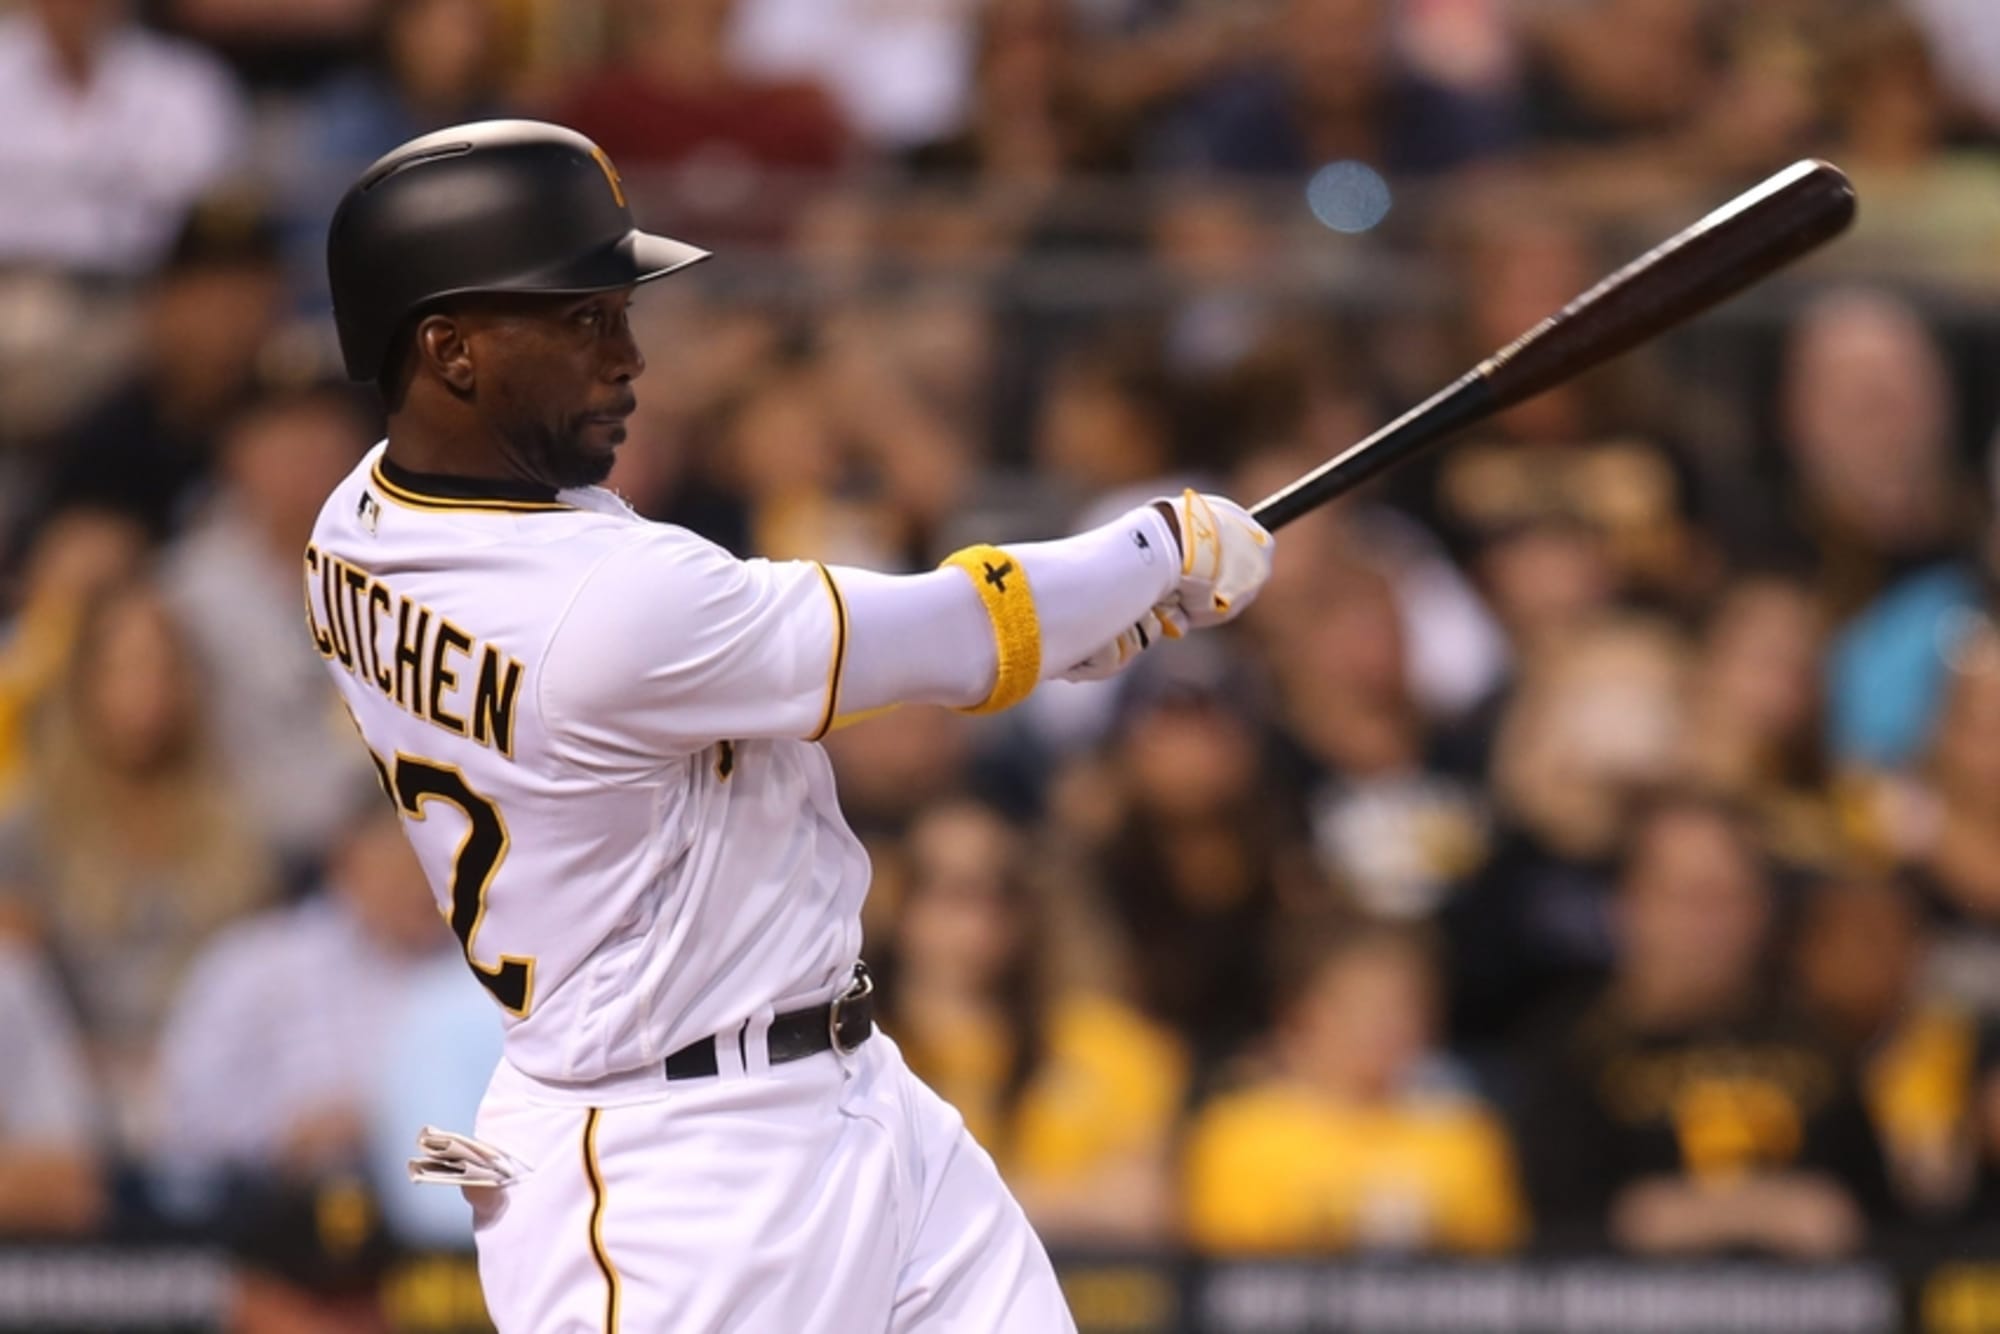 A star athlete at Fort Meade, Andrew McCutchen now is the 'conerstone' of  the Pittsburgh Pirates